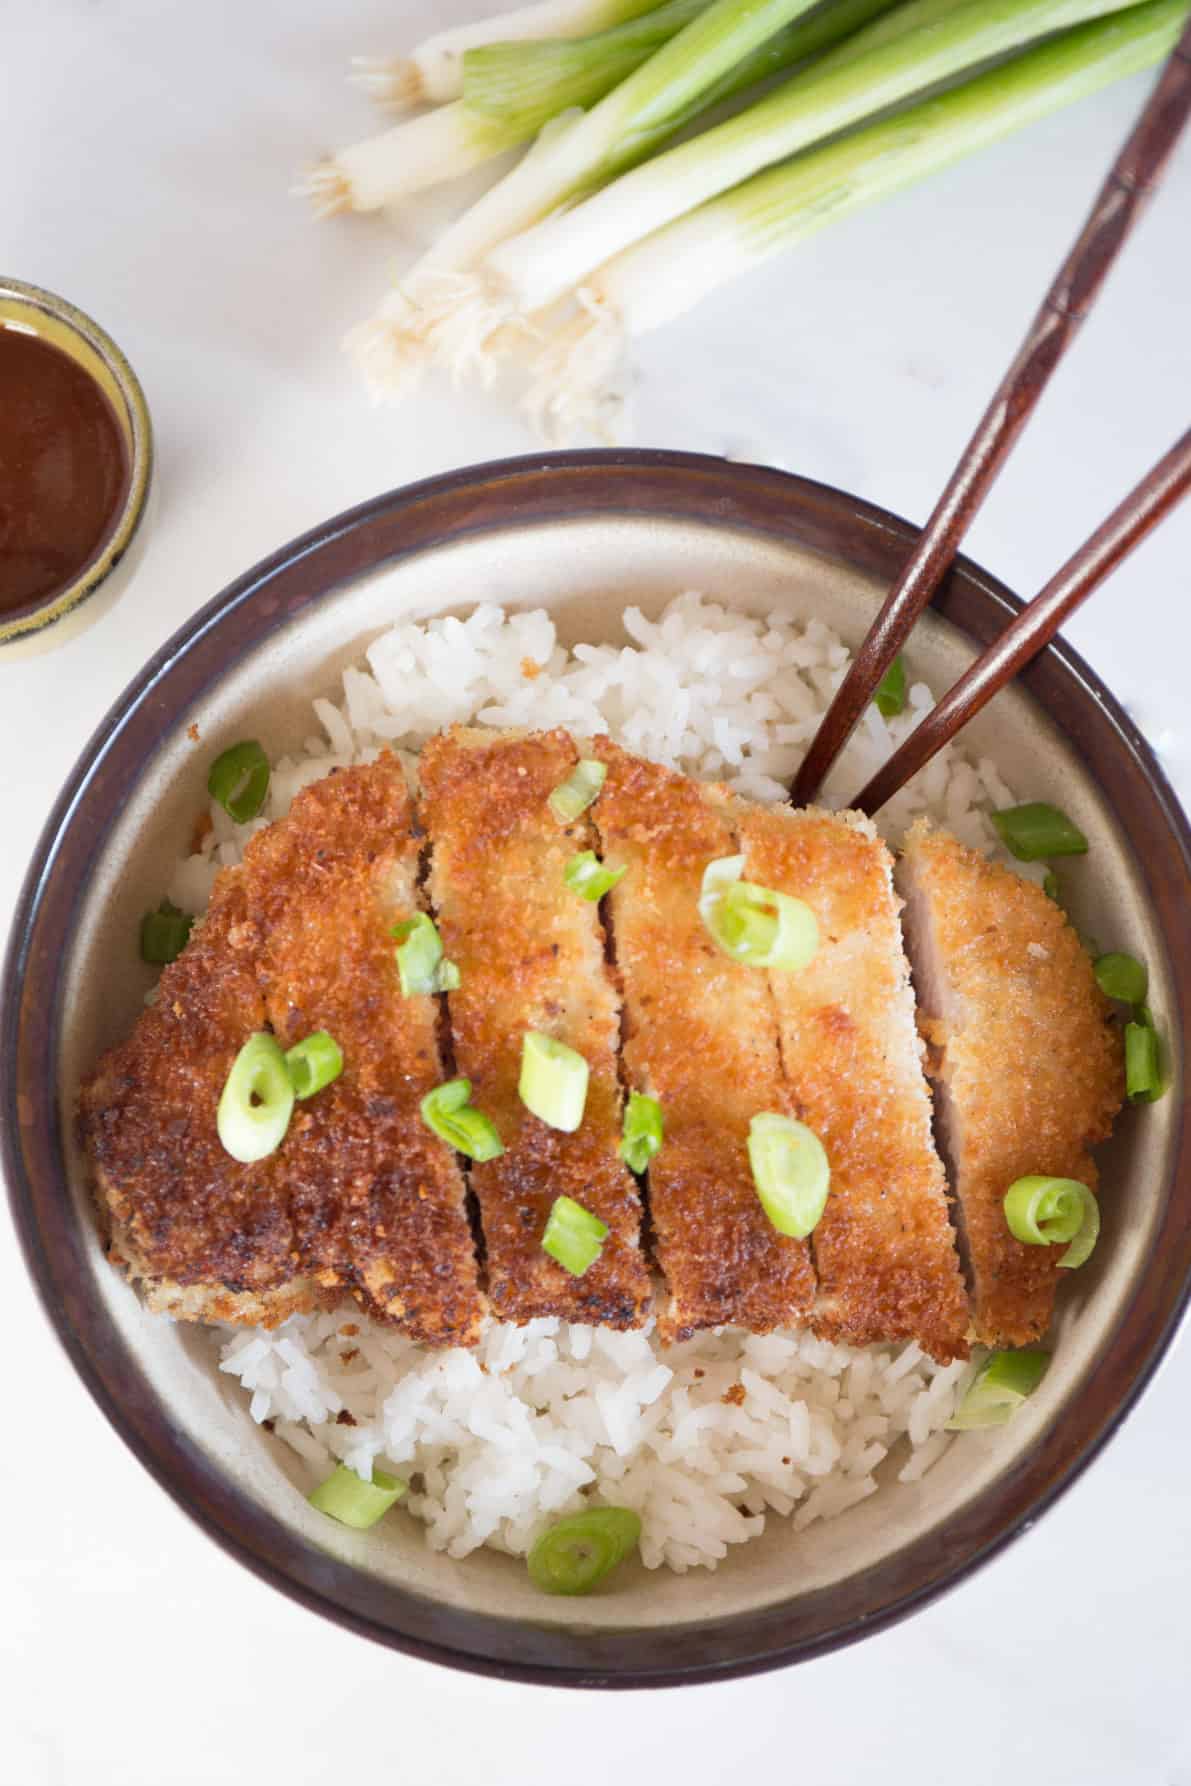 Japanese pork tonkatsu on a bed of rice in a bowl with chopsticks.